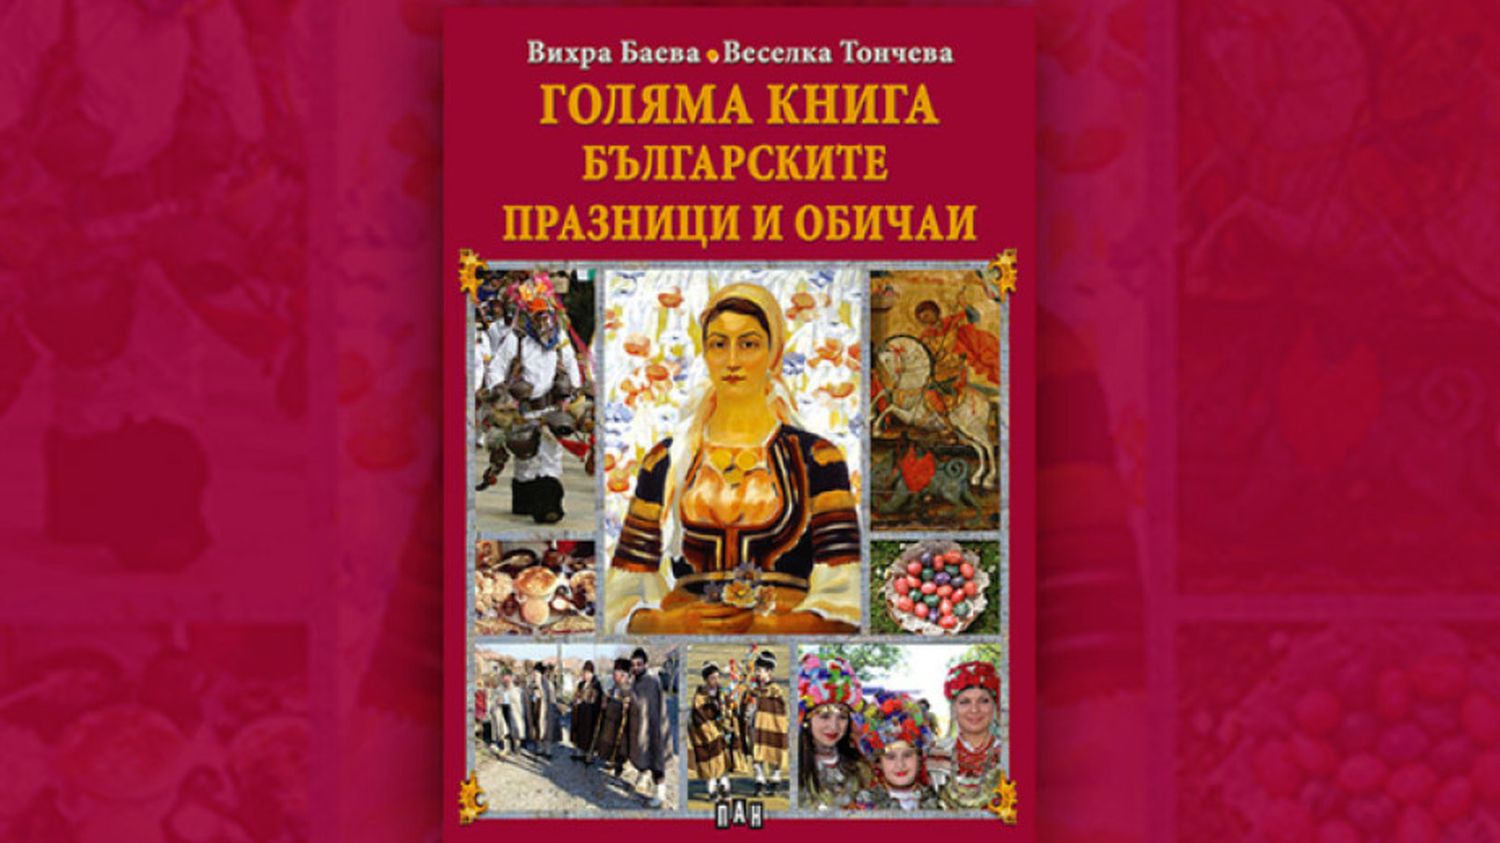 “Grand Book of Bulgarian Holidays and Customs” a valuable ritual